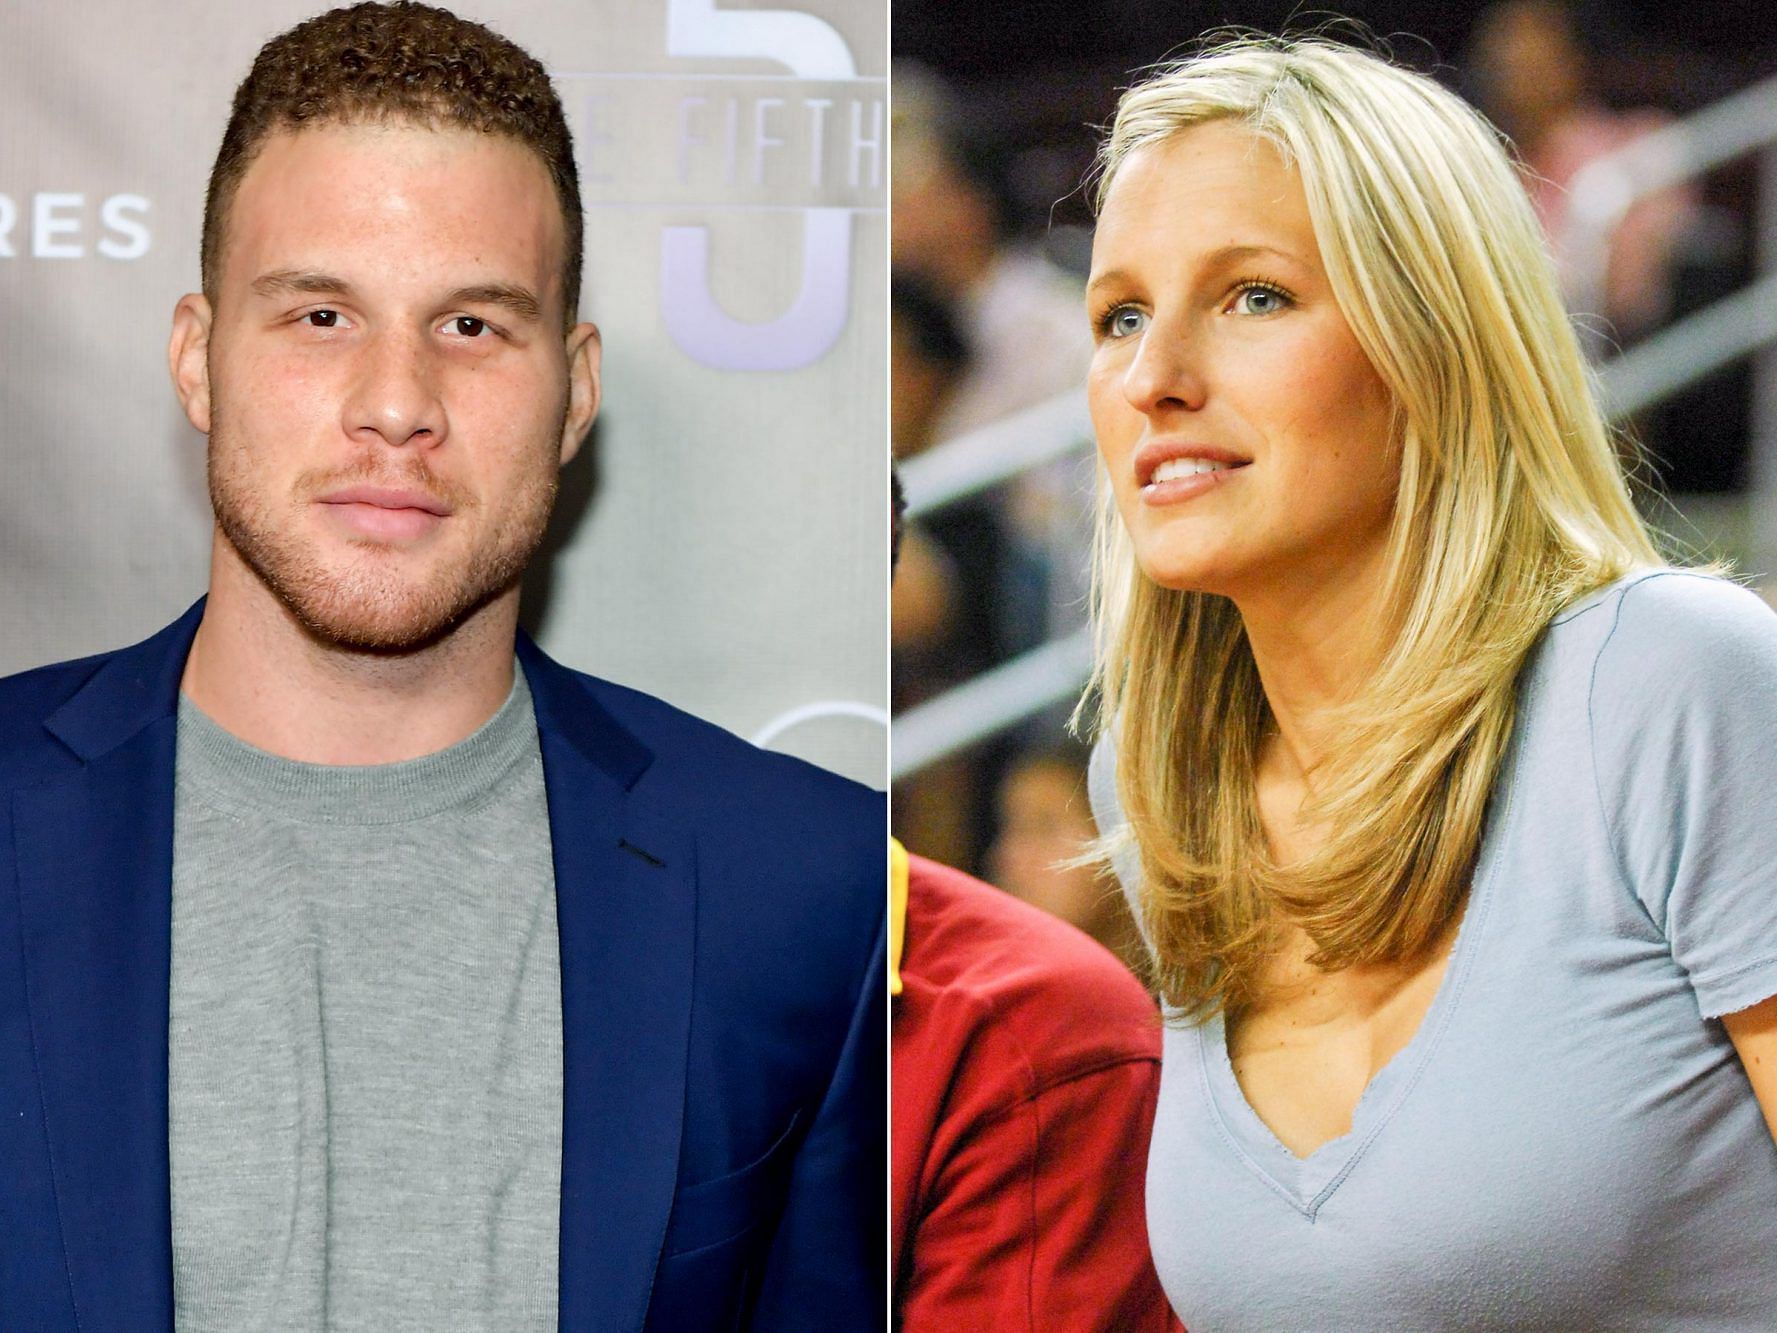 Blake Griffin and former fiancee Brynn Cameron have settled a palimony lawsuit. [photo: People]